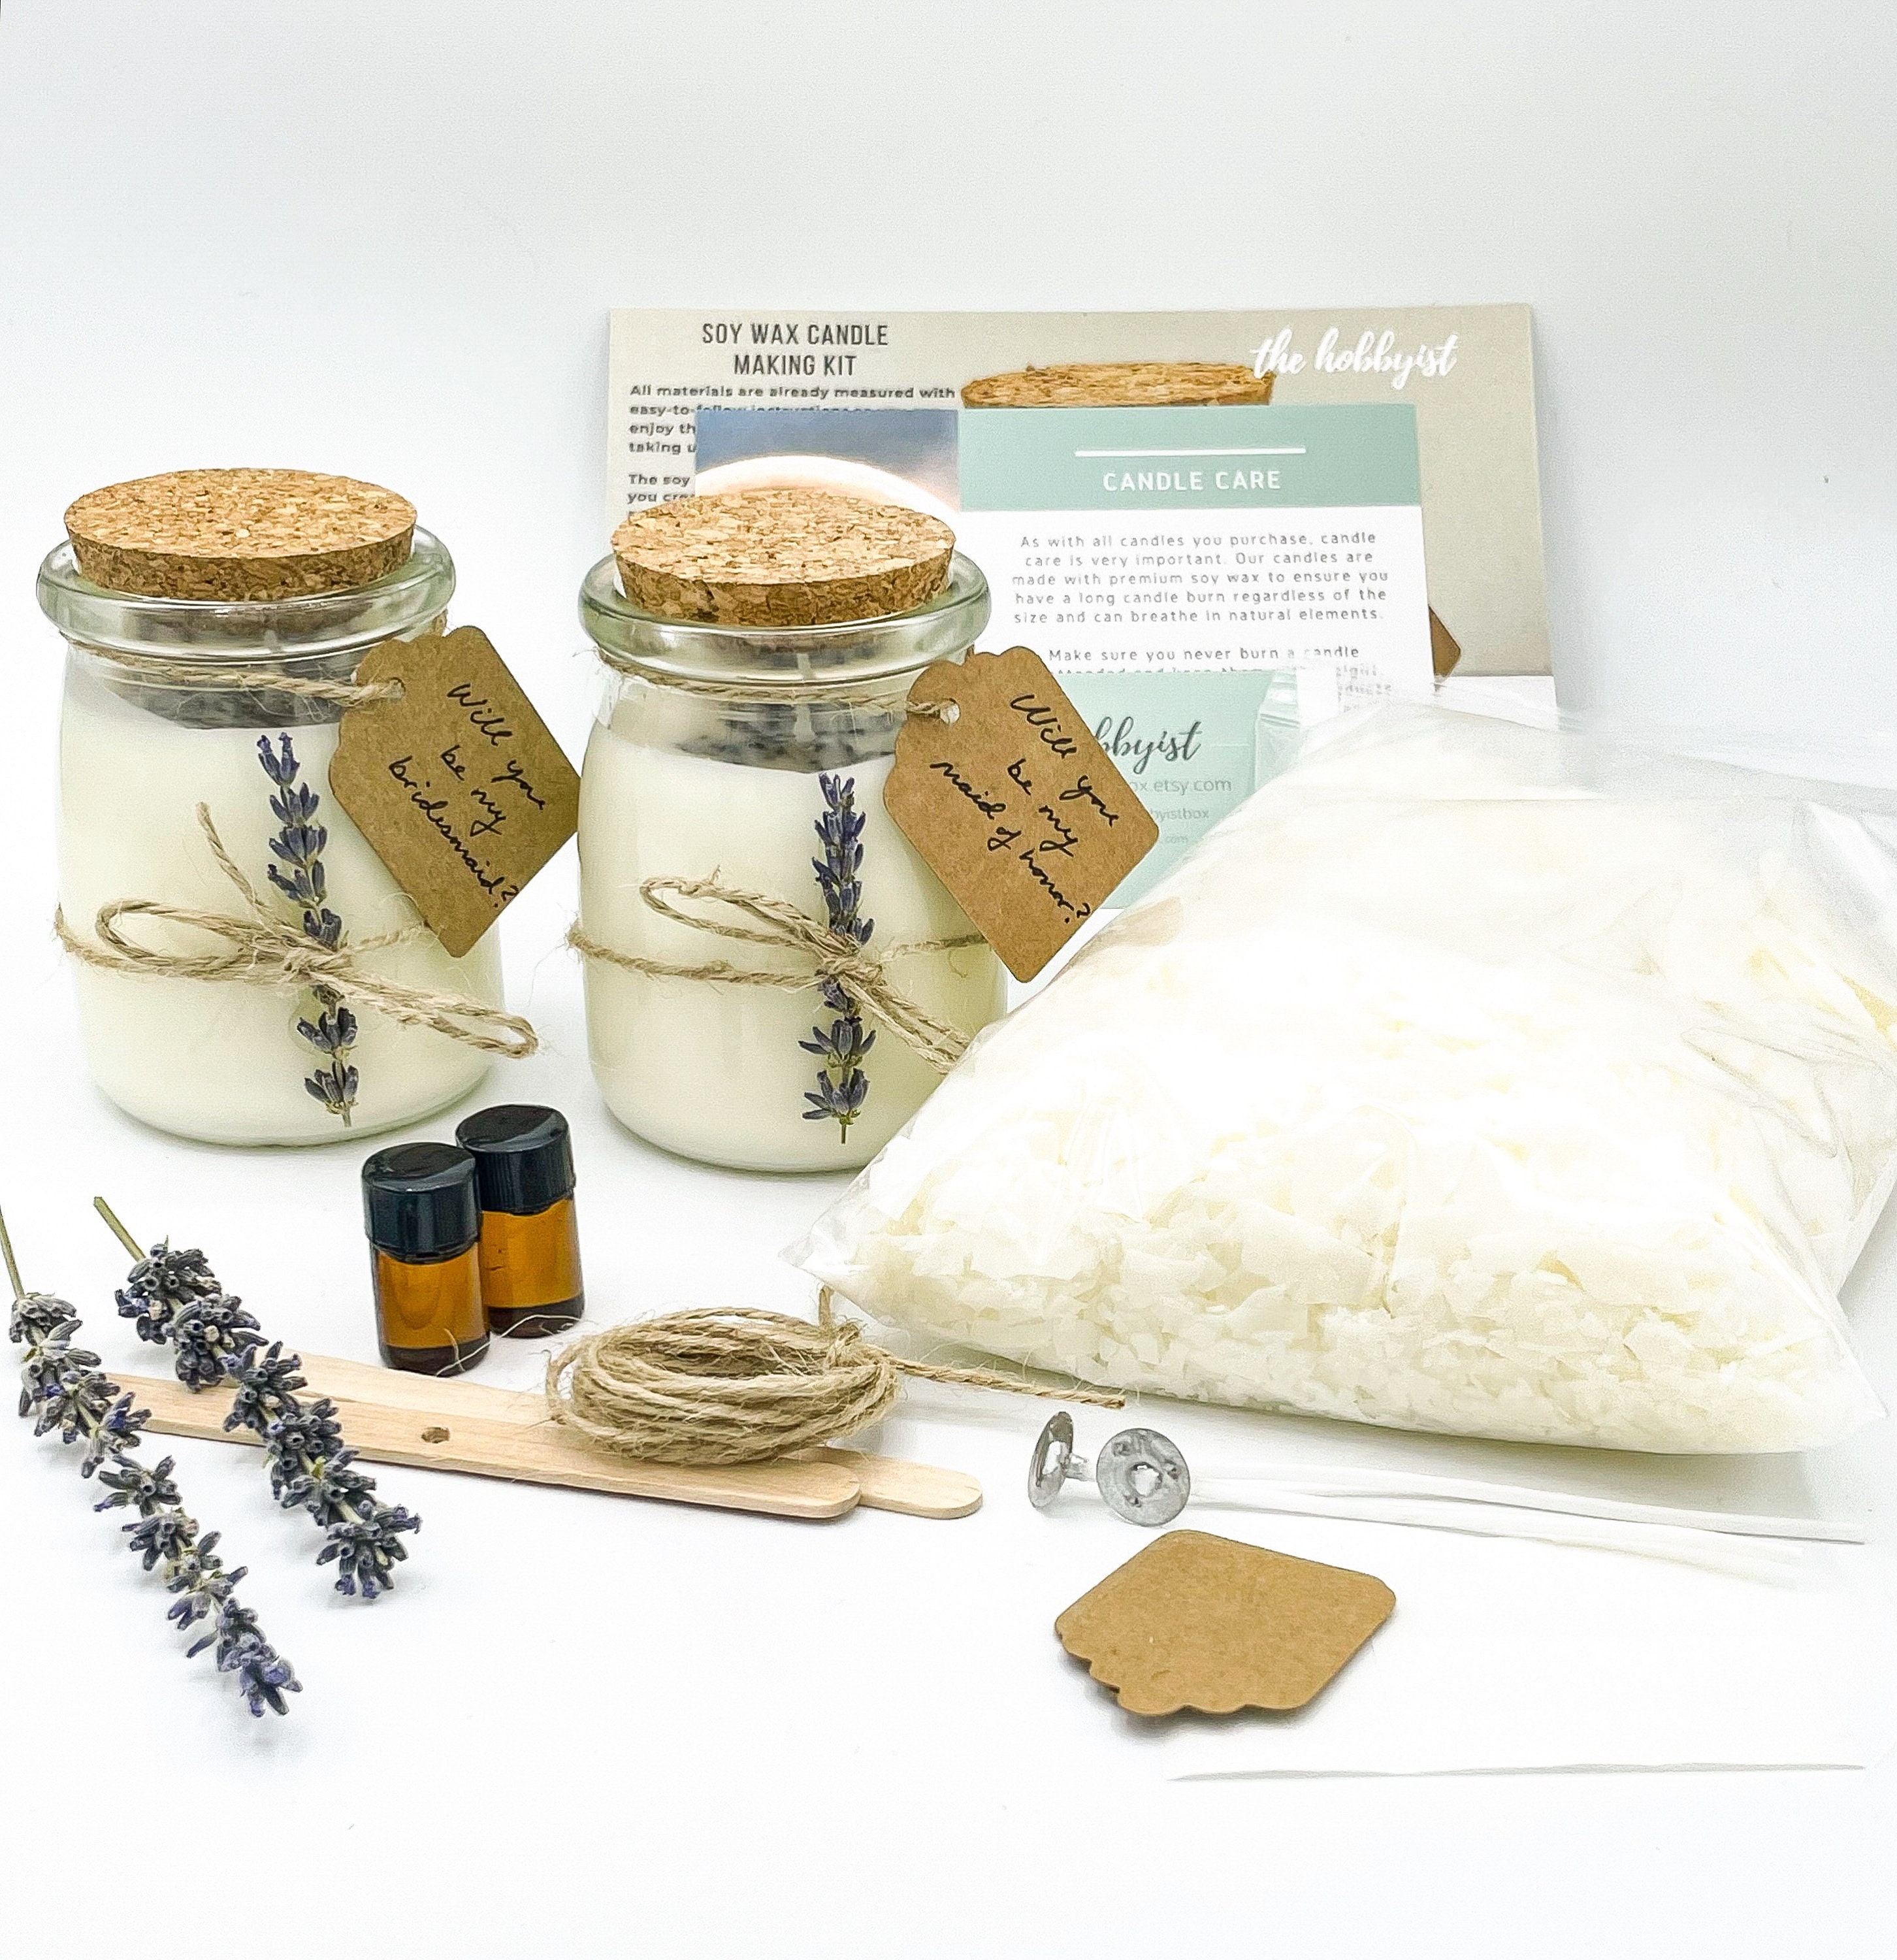 Candle Making Kits - Everything you need to make soy candles